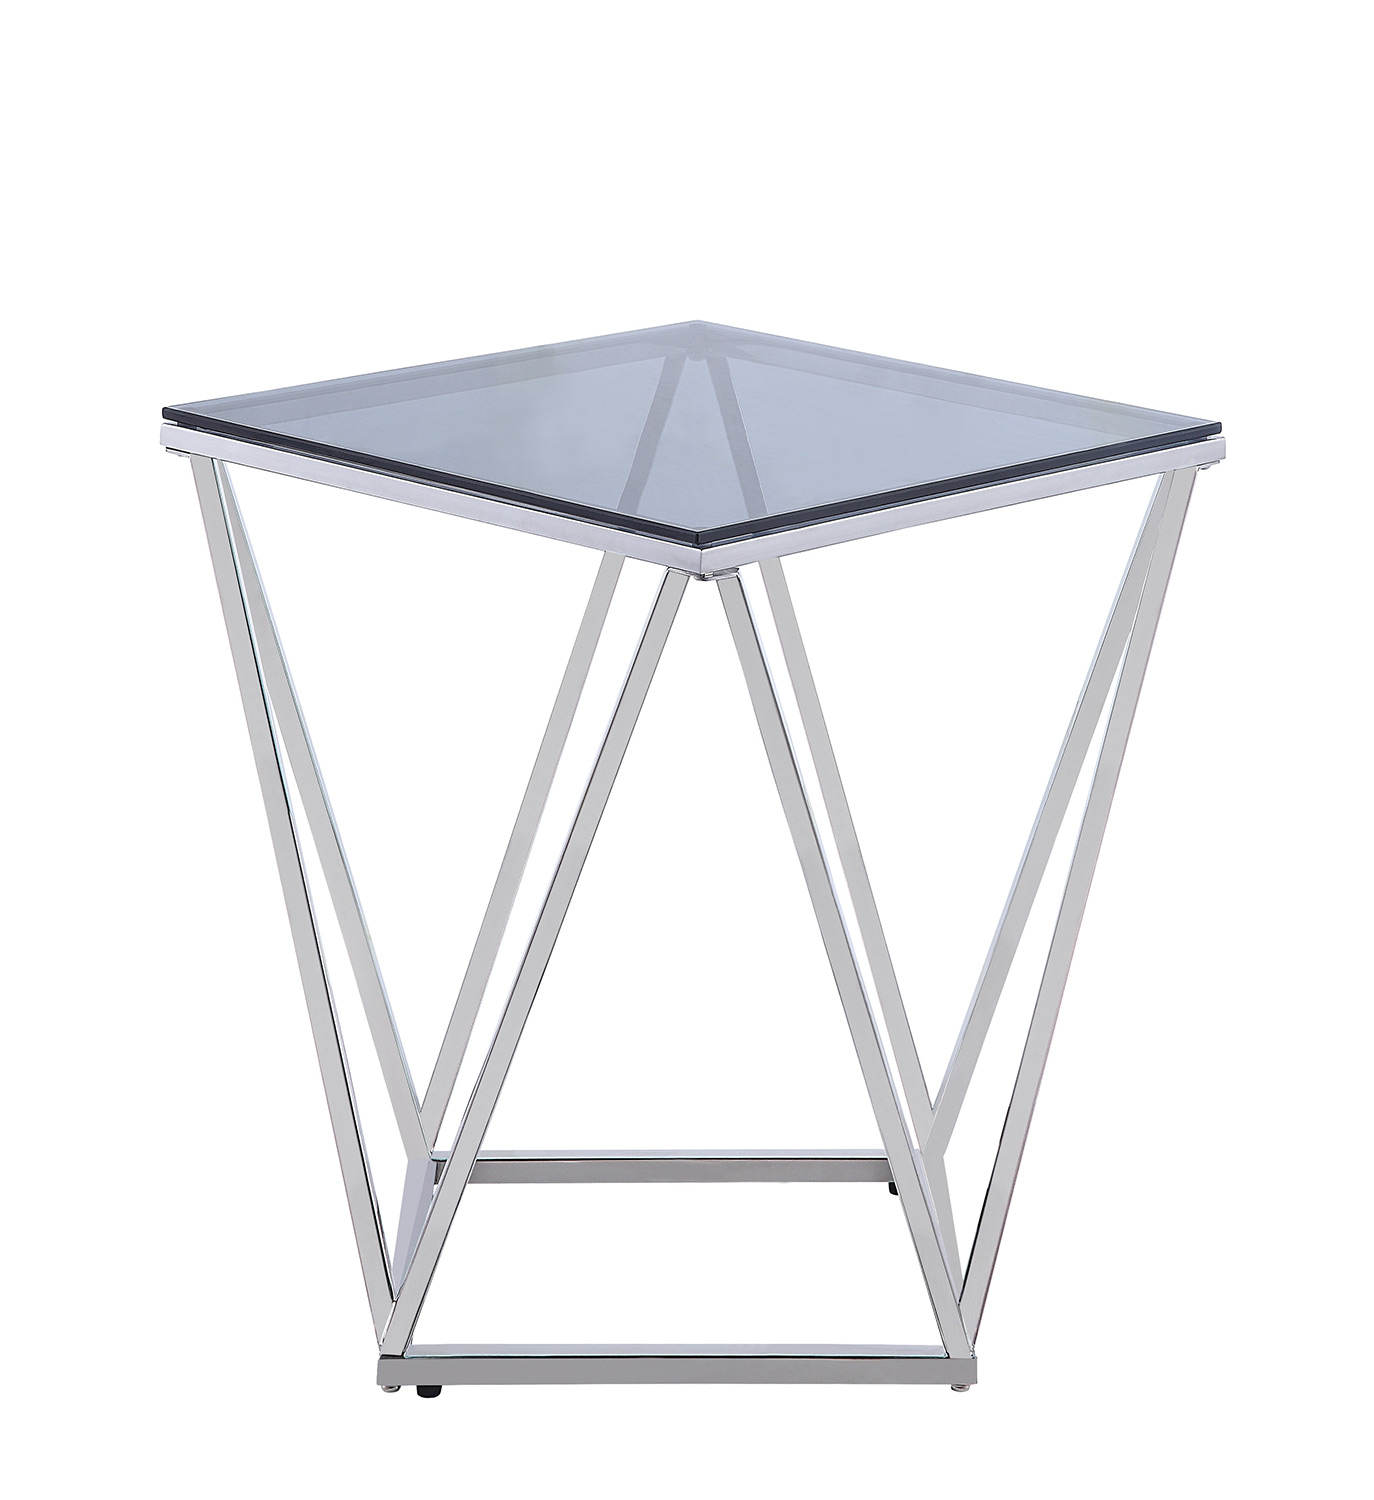 Homelegance Rex End Table with Gray Glass Insert - Silver